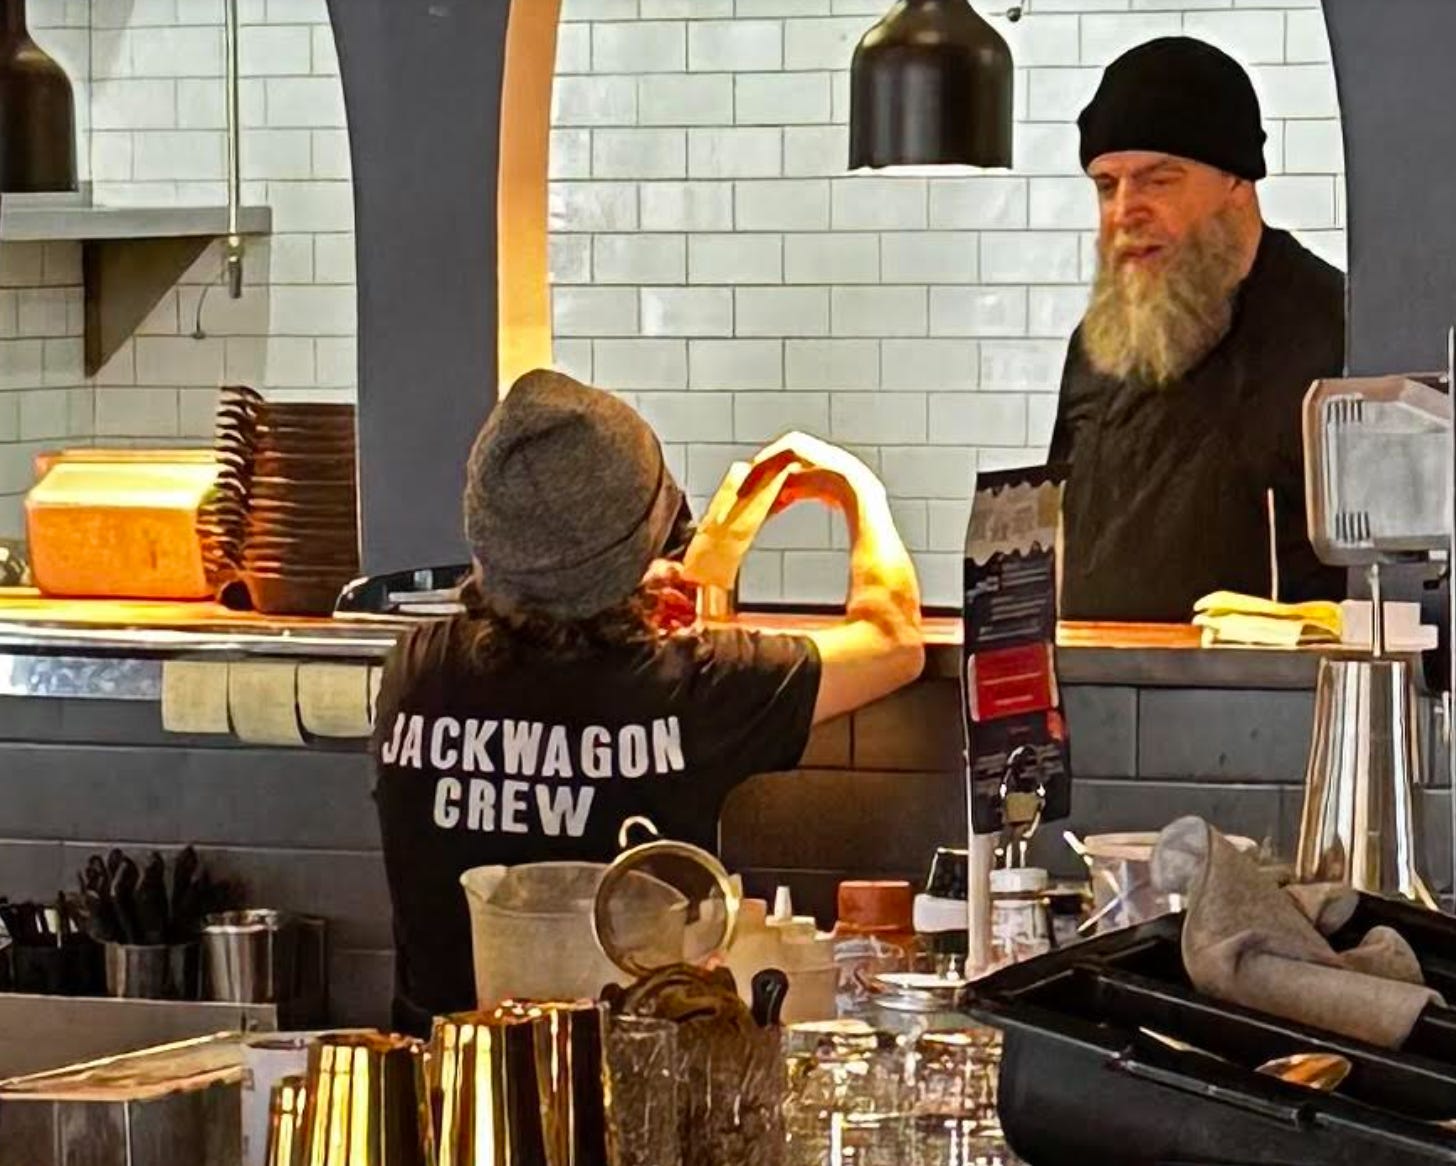 Kitchen worker wearing a t-shirt that says "Jackwagon Crew"